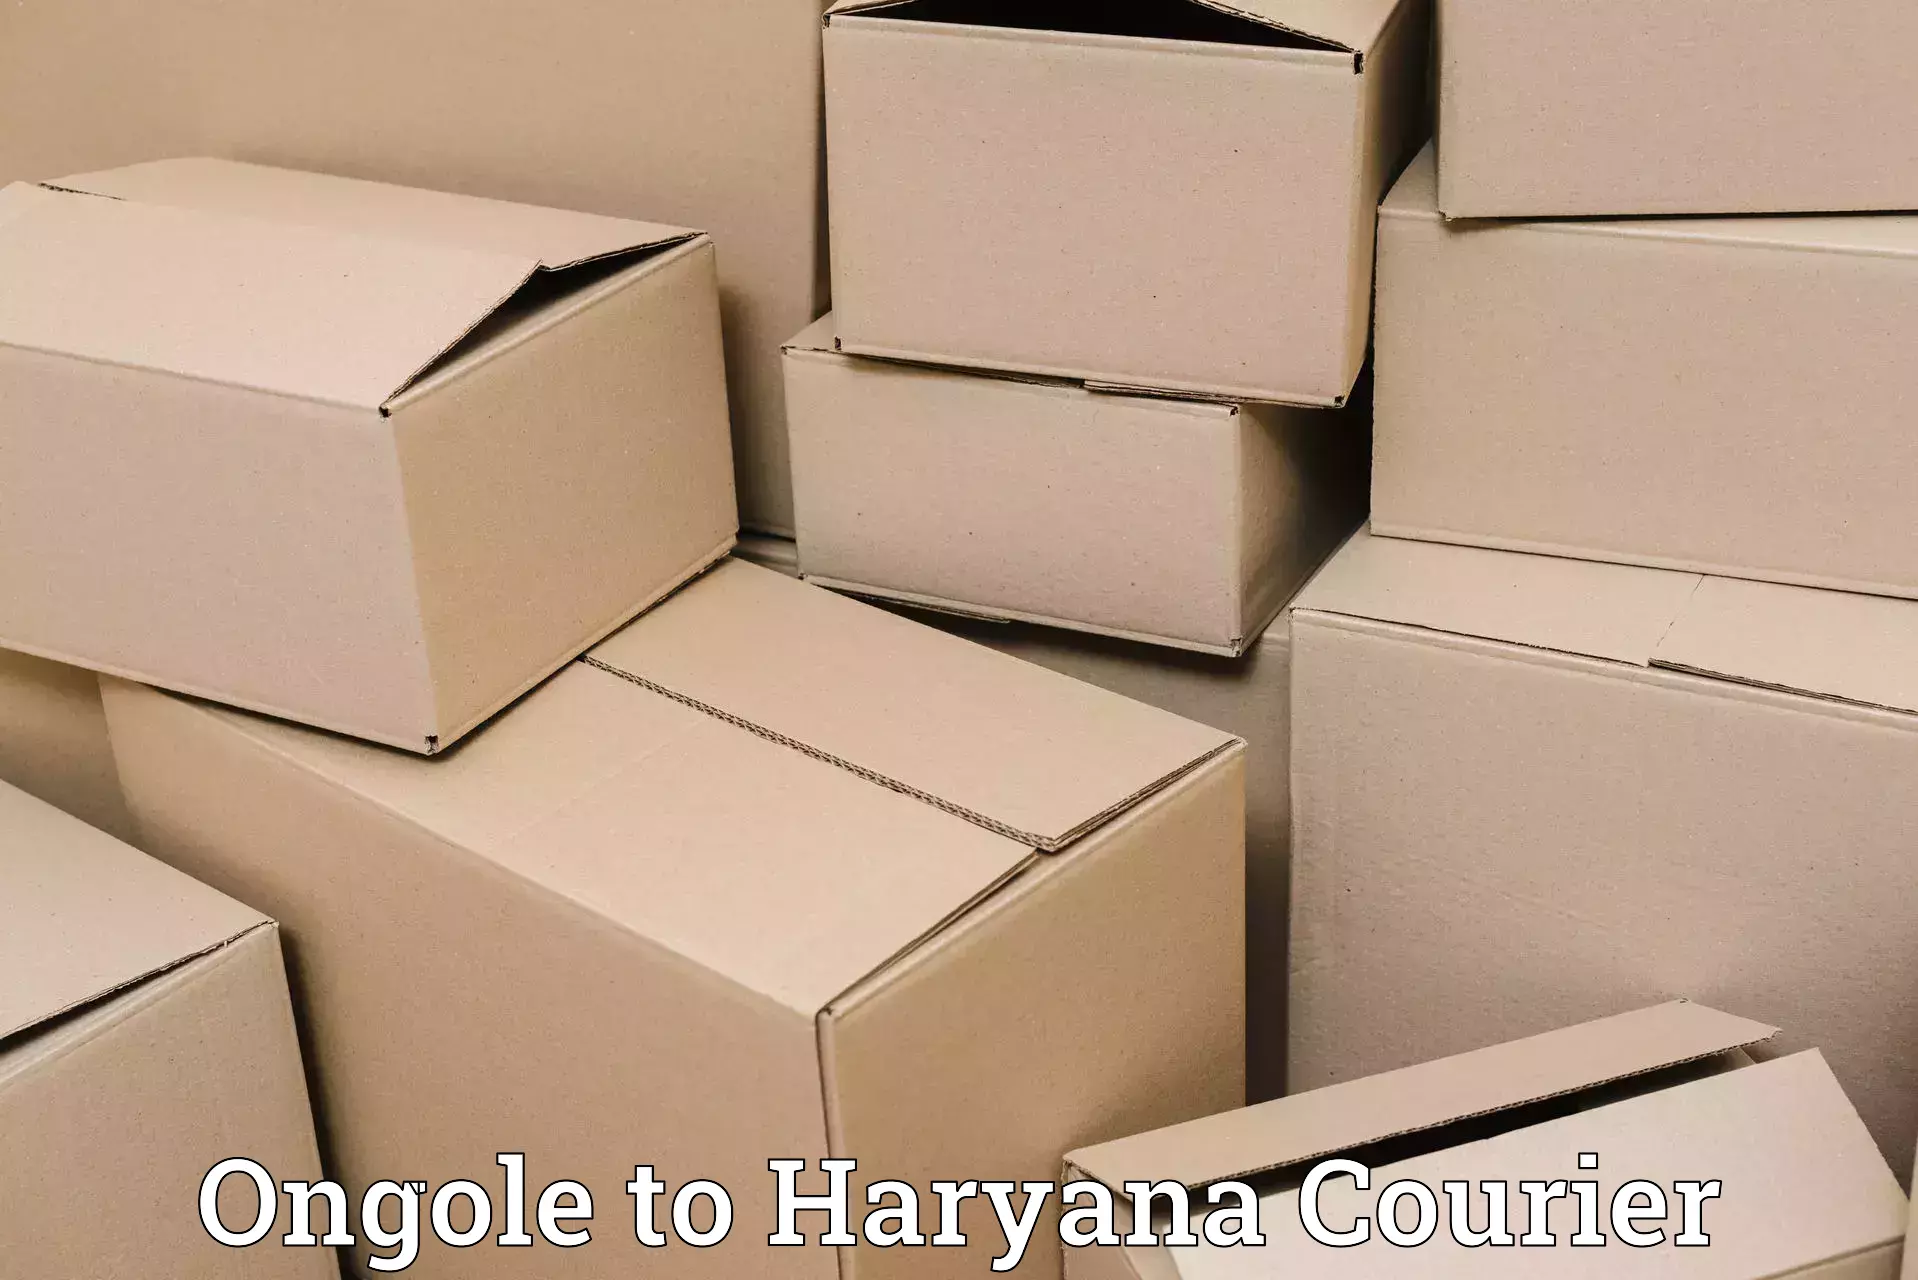 Cash on delivery service Ongole to NCR Haryana